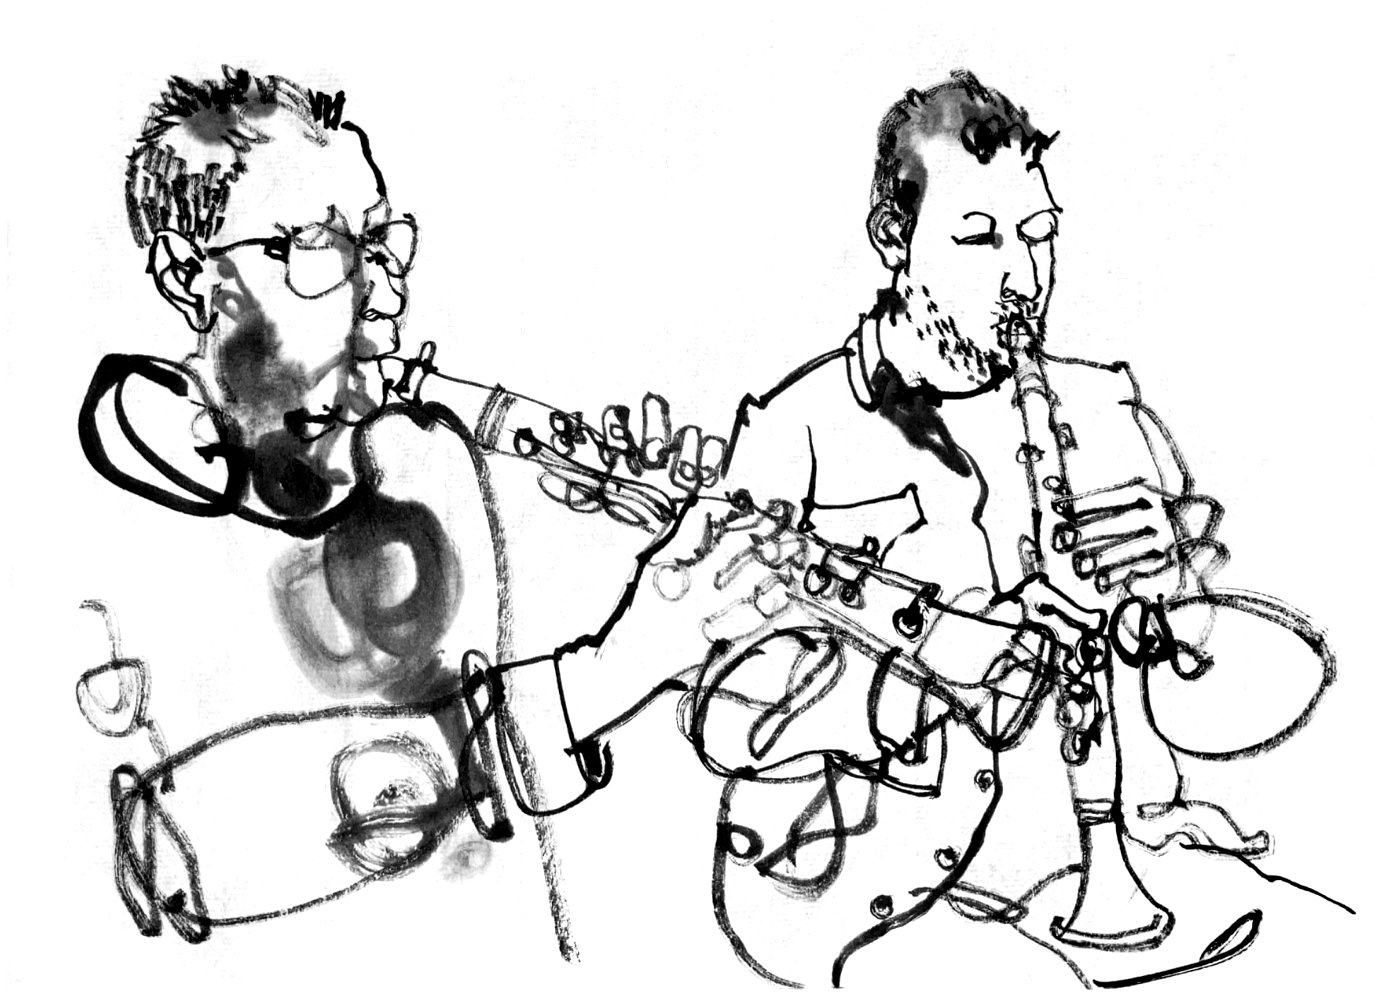 Ink drawing of two clarinet players